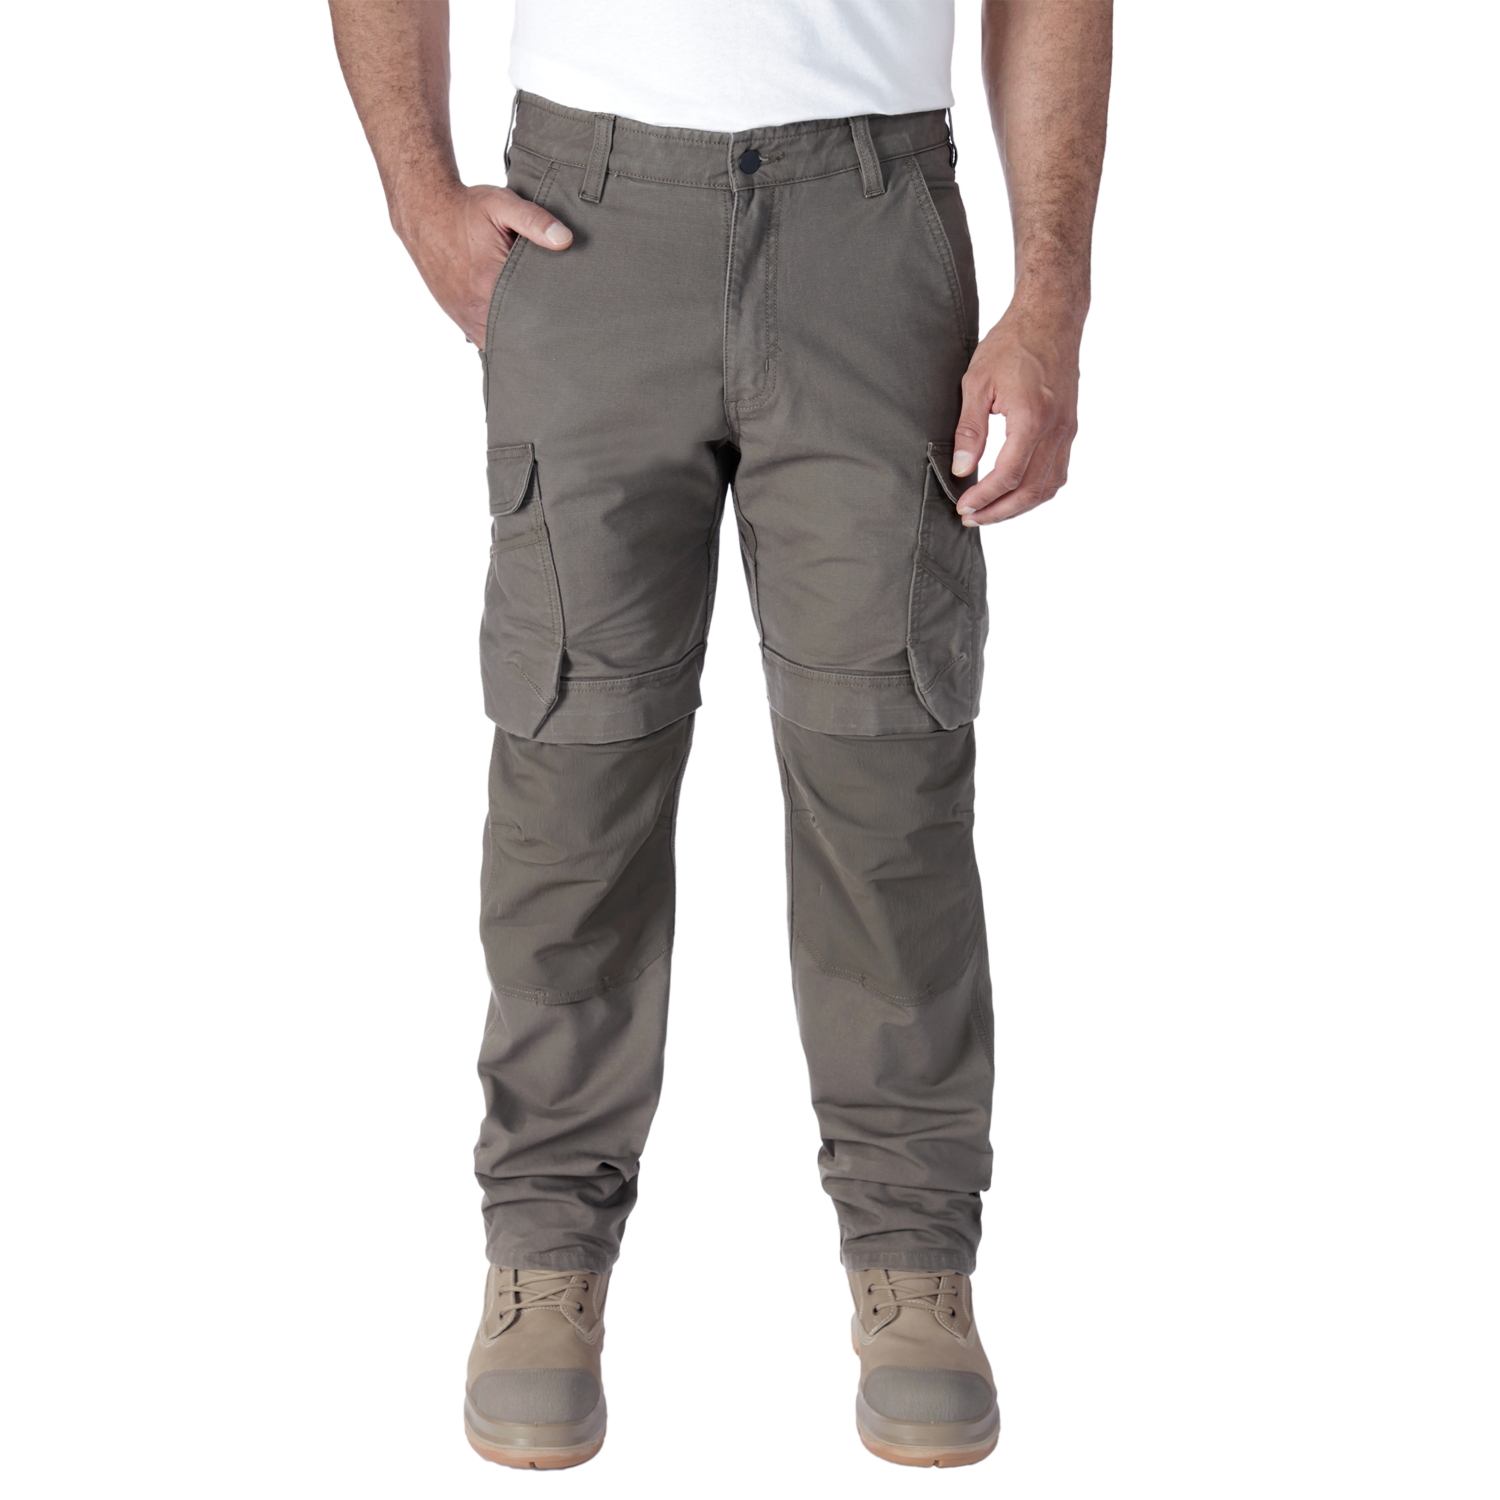 STEEL_RUGGED_CARGO_WORK_PANT_dTZ9HIXQOC